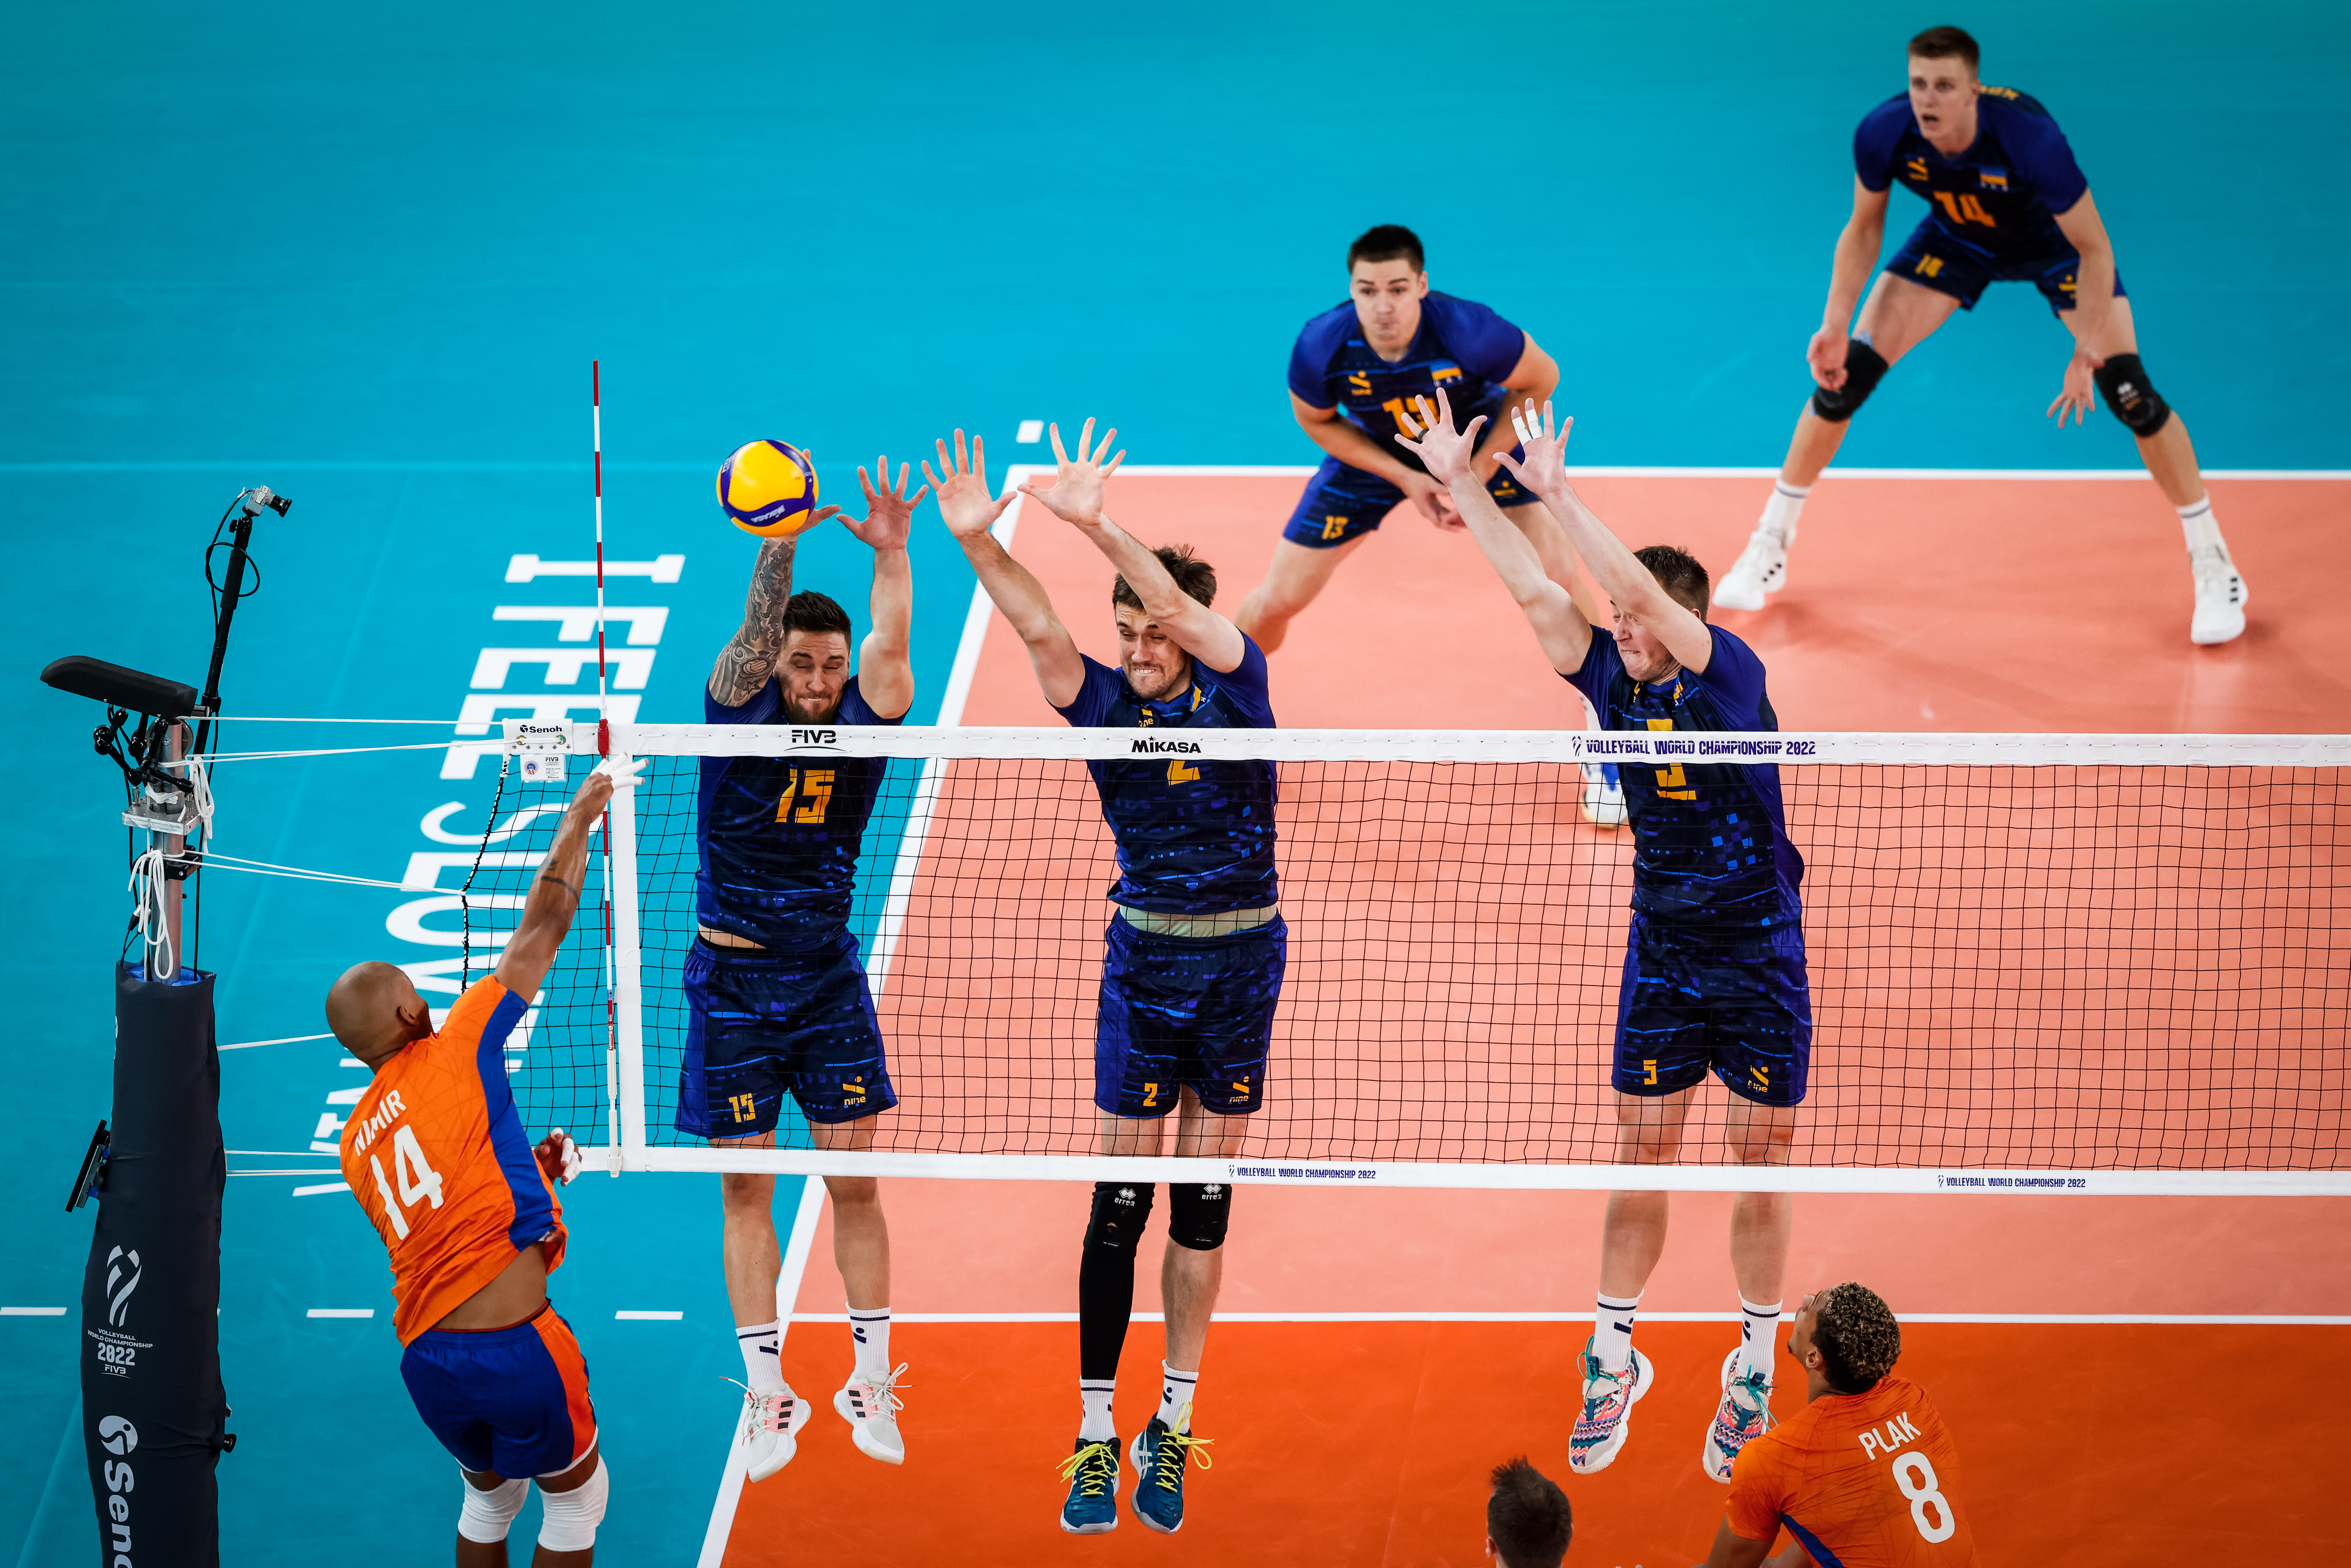 FIVB yet to make call on stripping Russia of 2022 FIVB Men's World  Championship